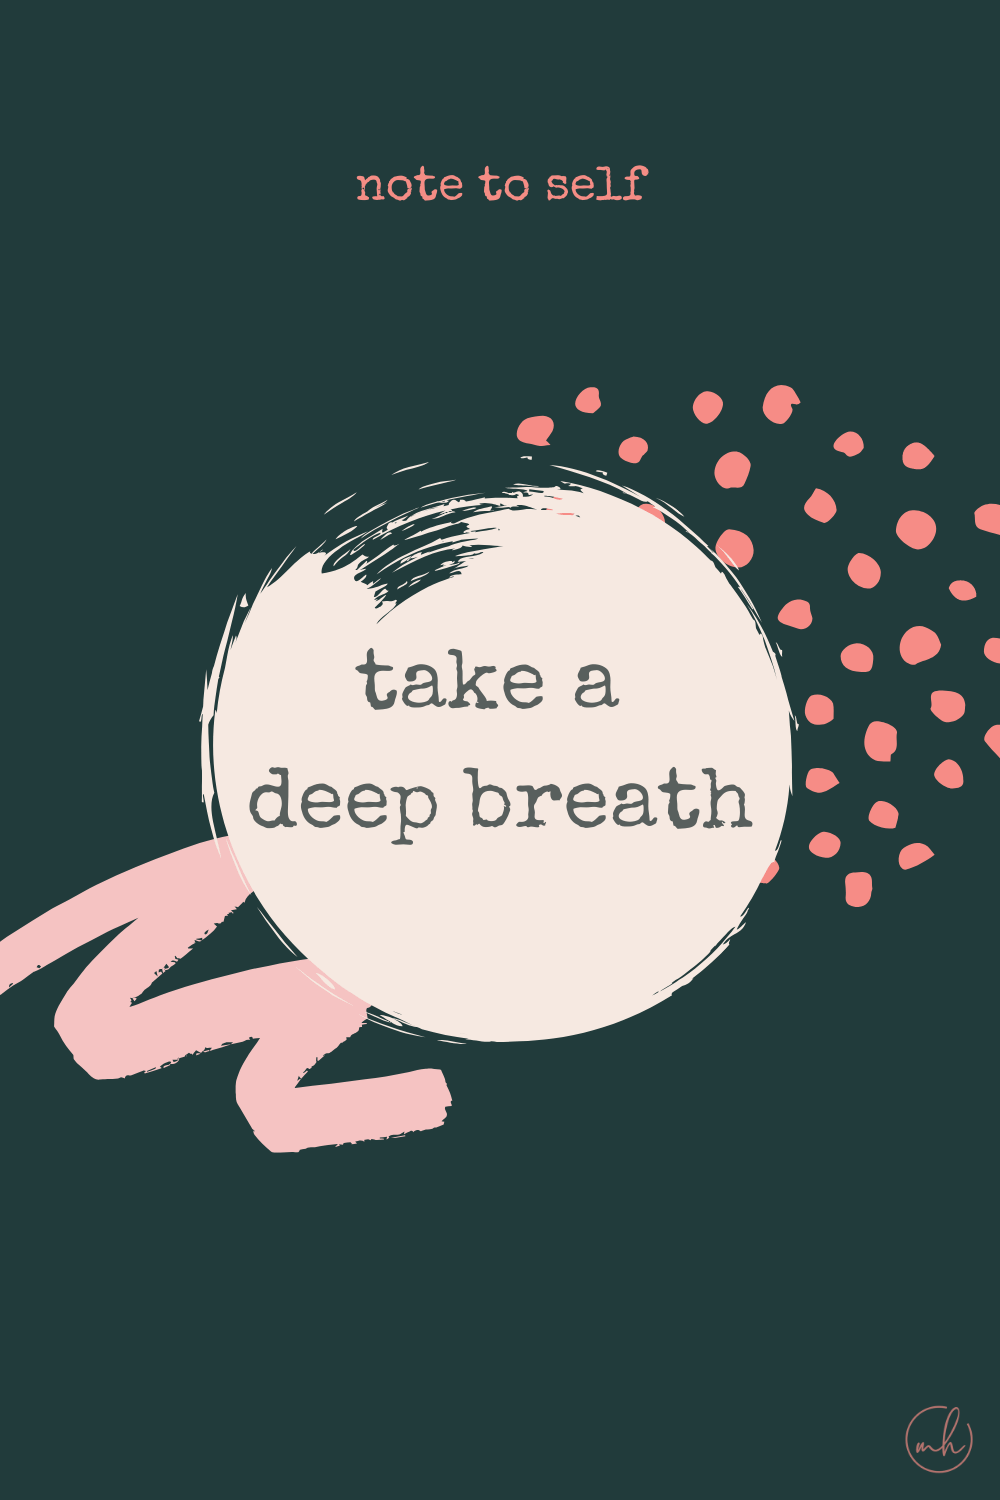 Take a deep breath - Note to self quotes | myhoogah